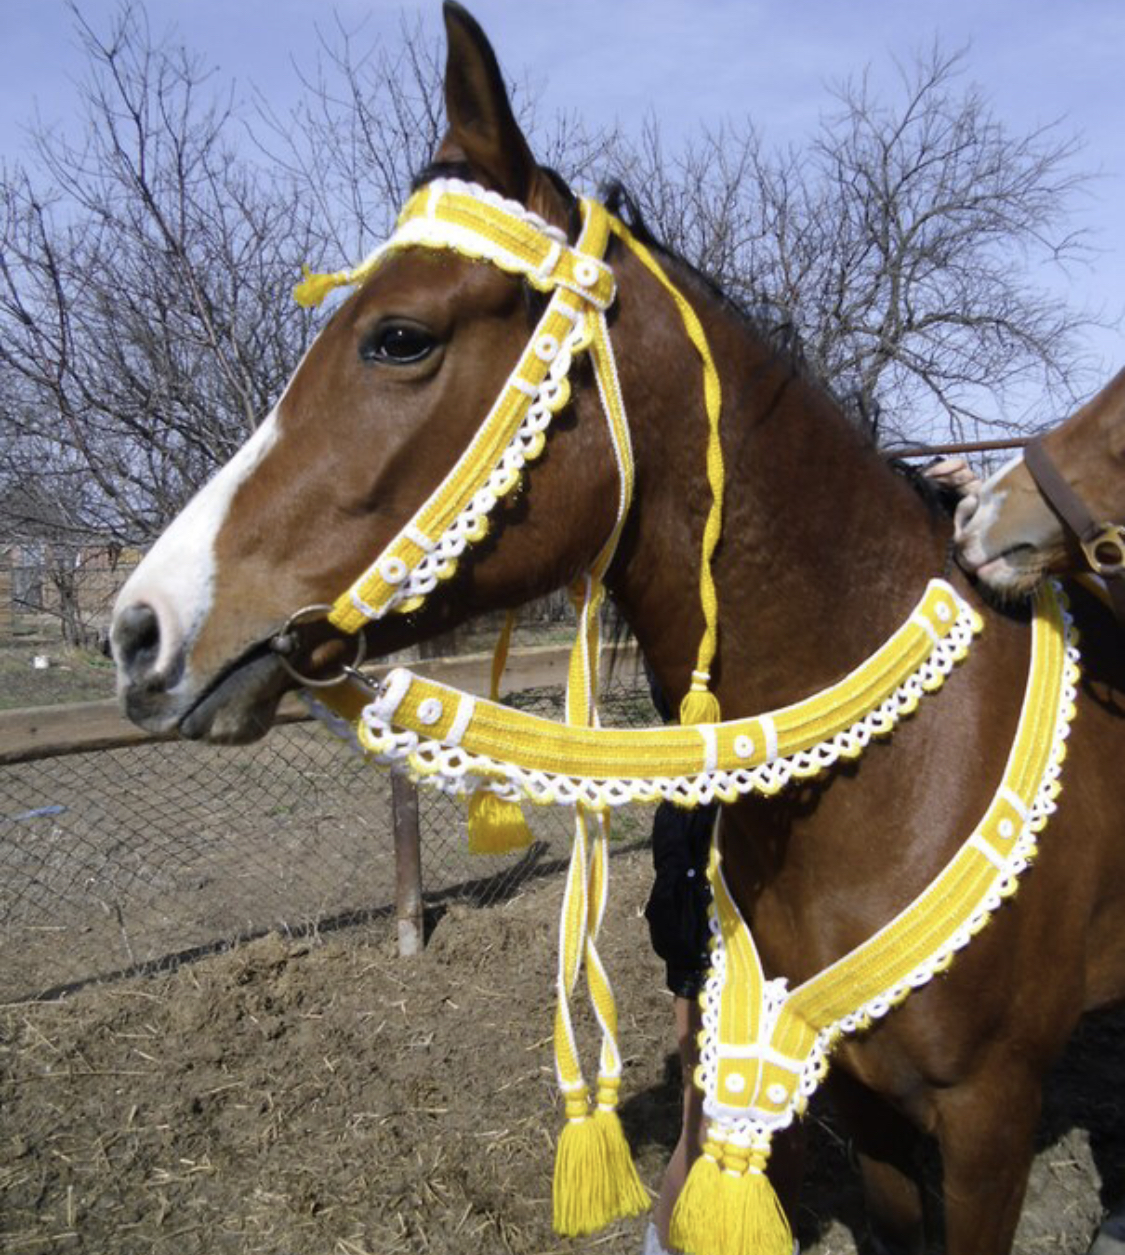 A horse wearing a yellow lead